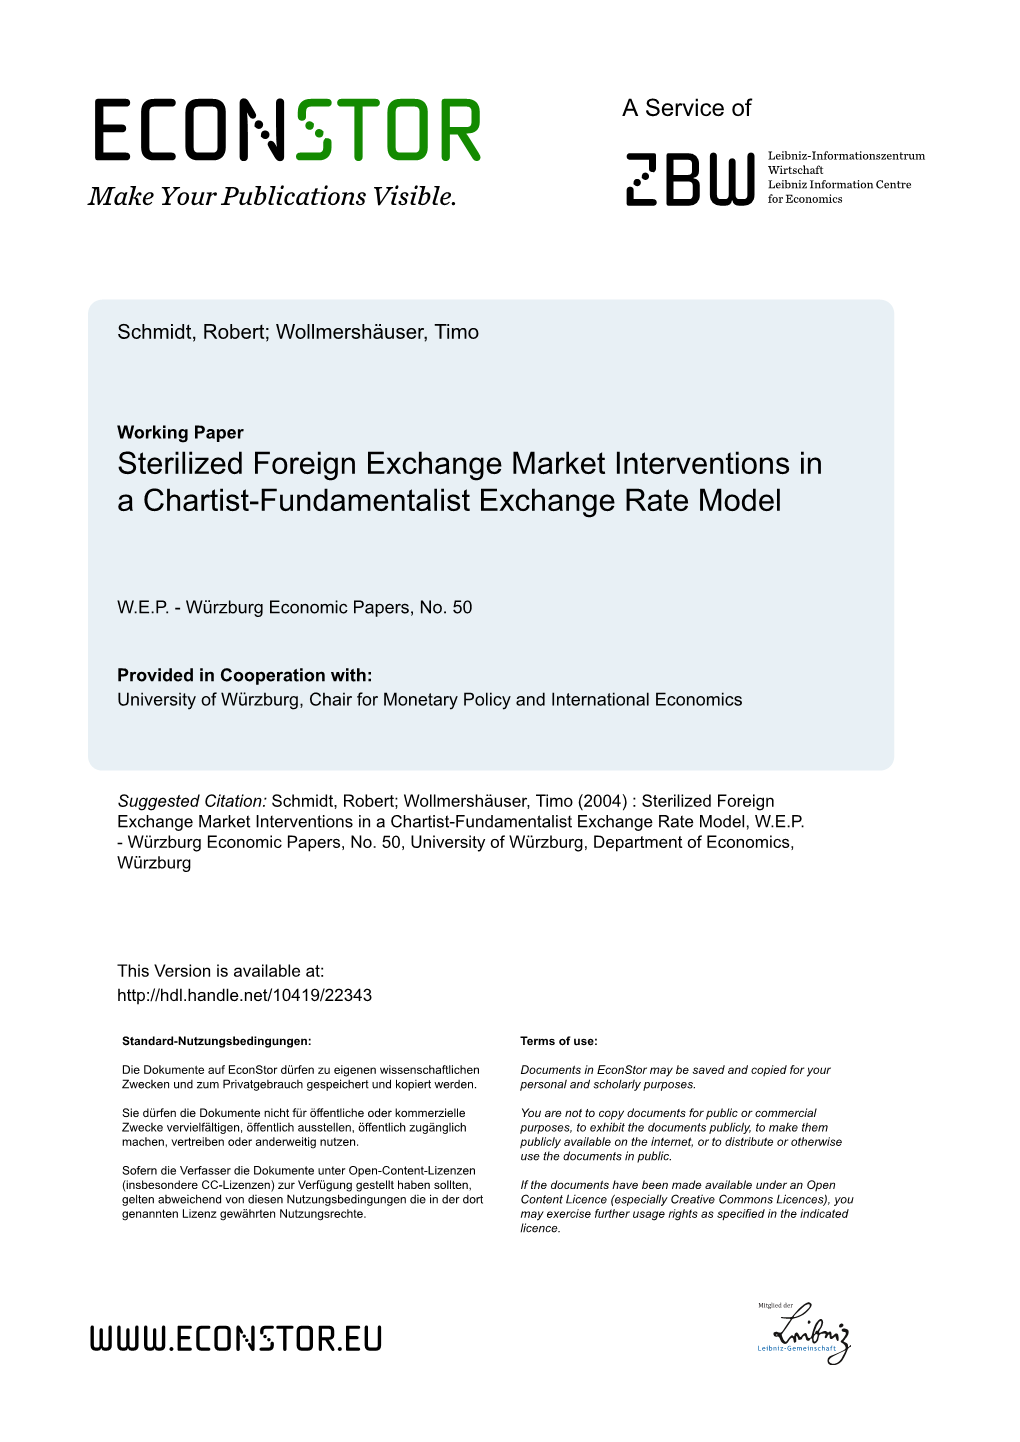 Sterilized Foreign Exchange Market Interventions in a Chartist-Fundamentalist Exchange Rate Model